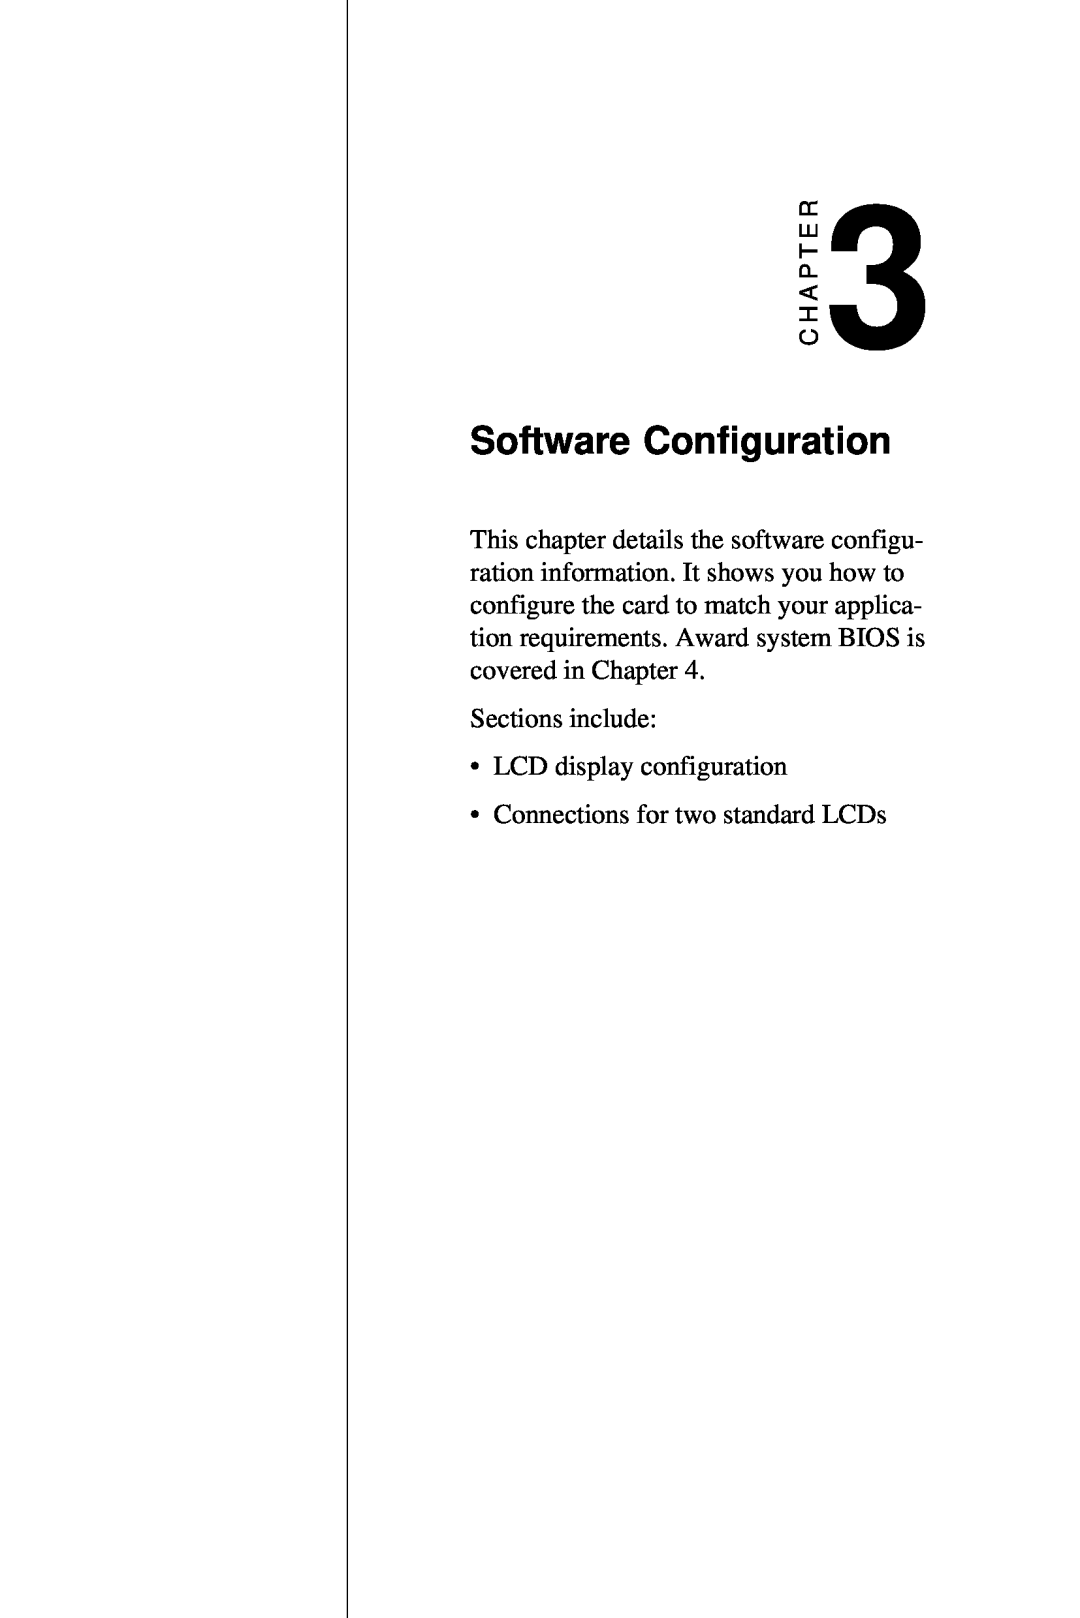 AMD PCM-5820 manual Software Configuration, Sections include LCD display configuration, Connections for two standard LCDs 